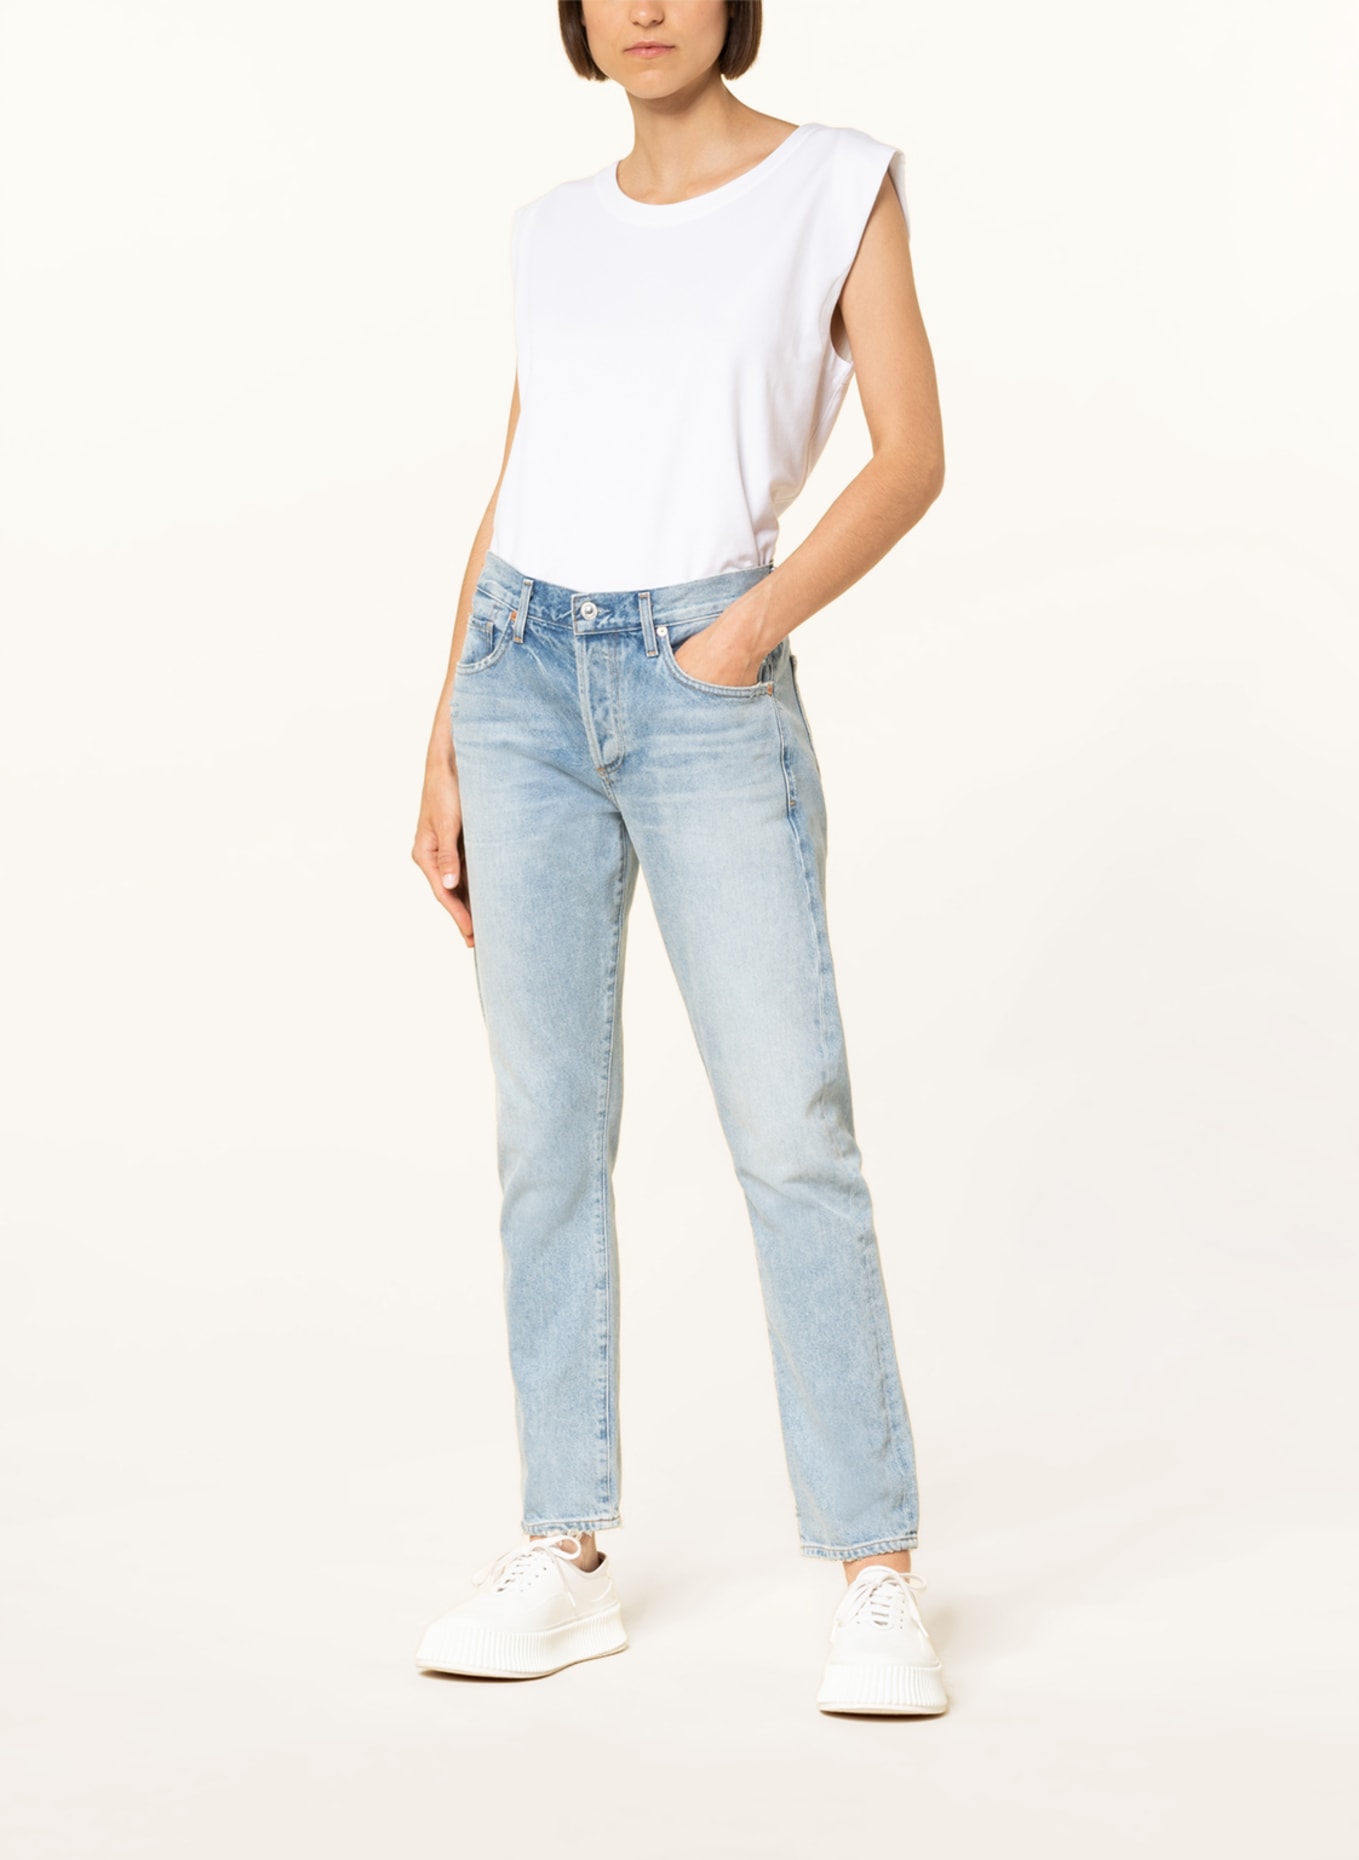 CITIZENS of HUMANITY Boyfriend jeans EMERSON , Color: Night Cap lt ind w/damage (Image 2)